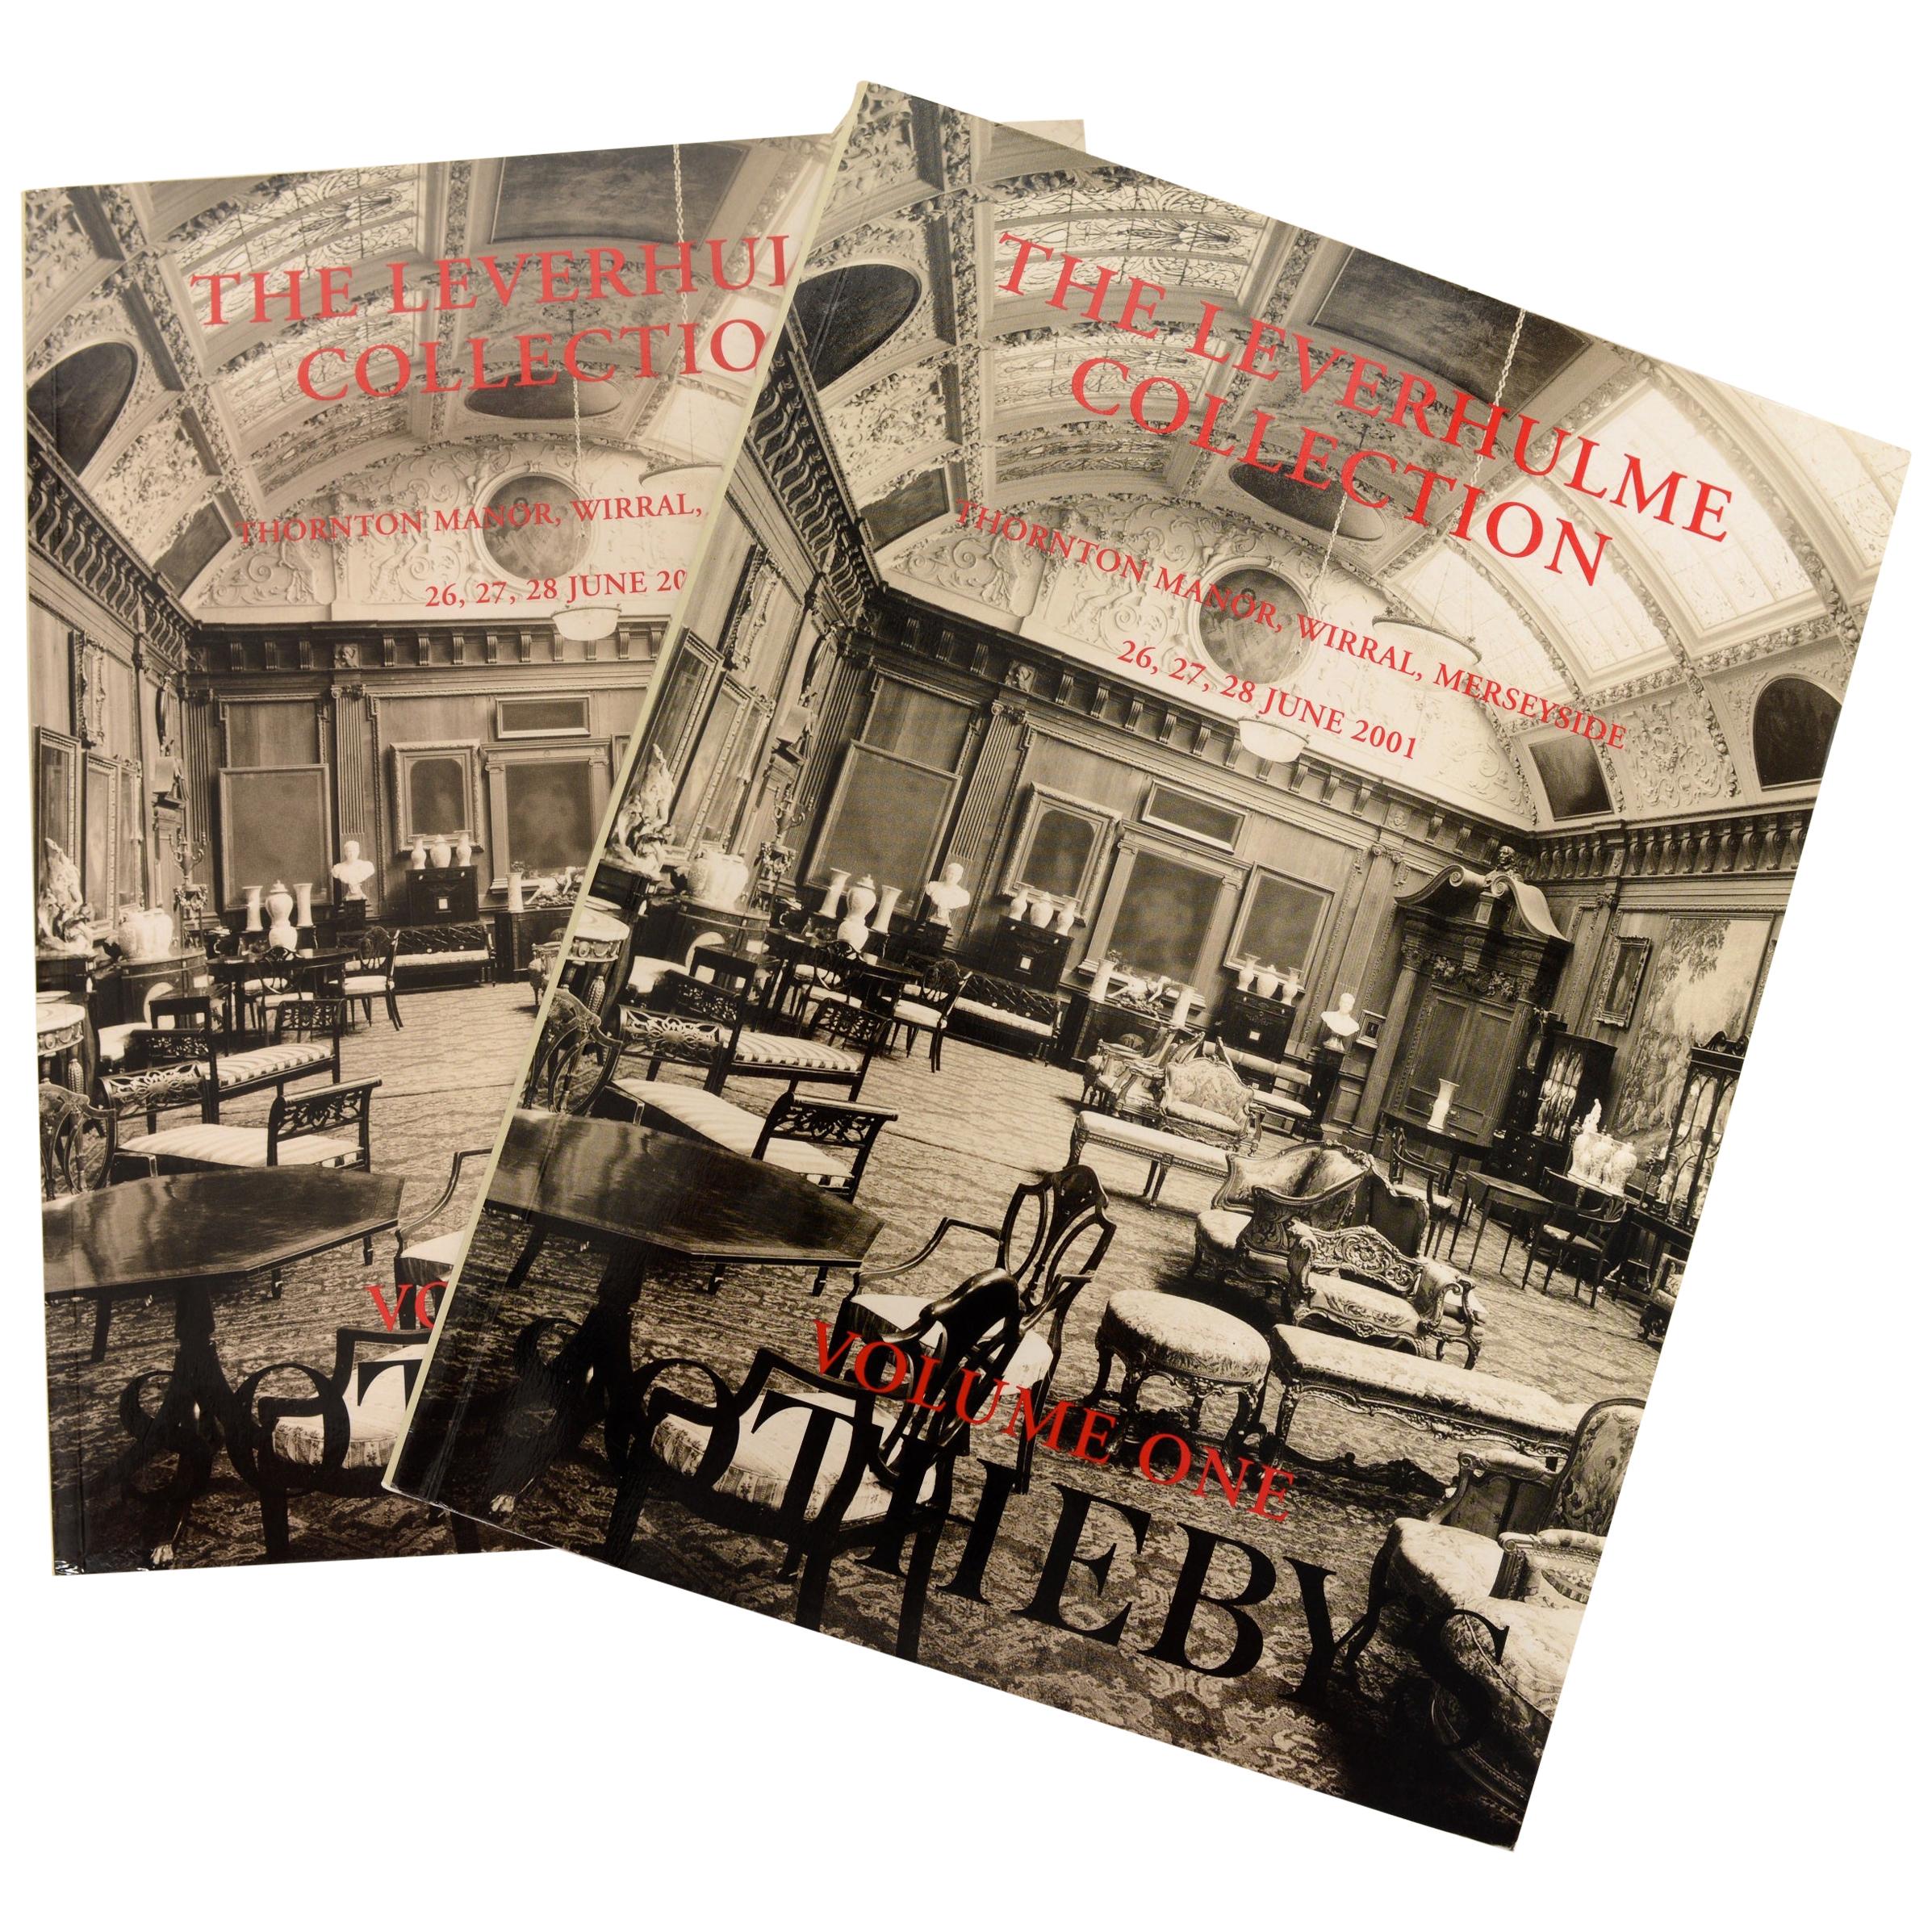 The Leverhulme Collection Thornton Manor, Wirral Merseyside, Vol One and Two For Sale